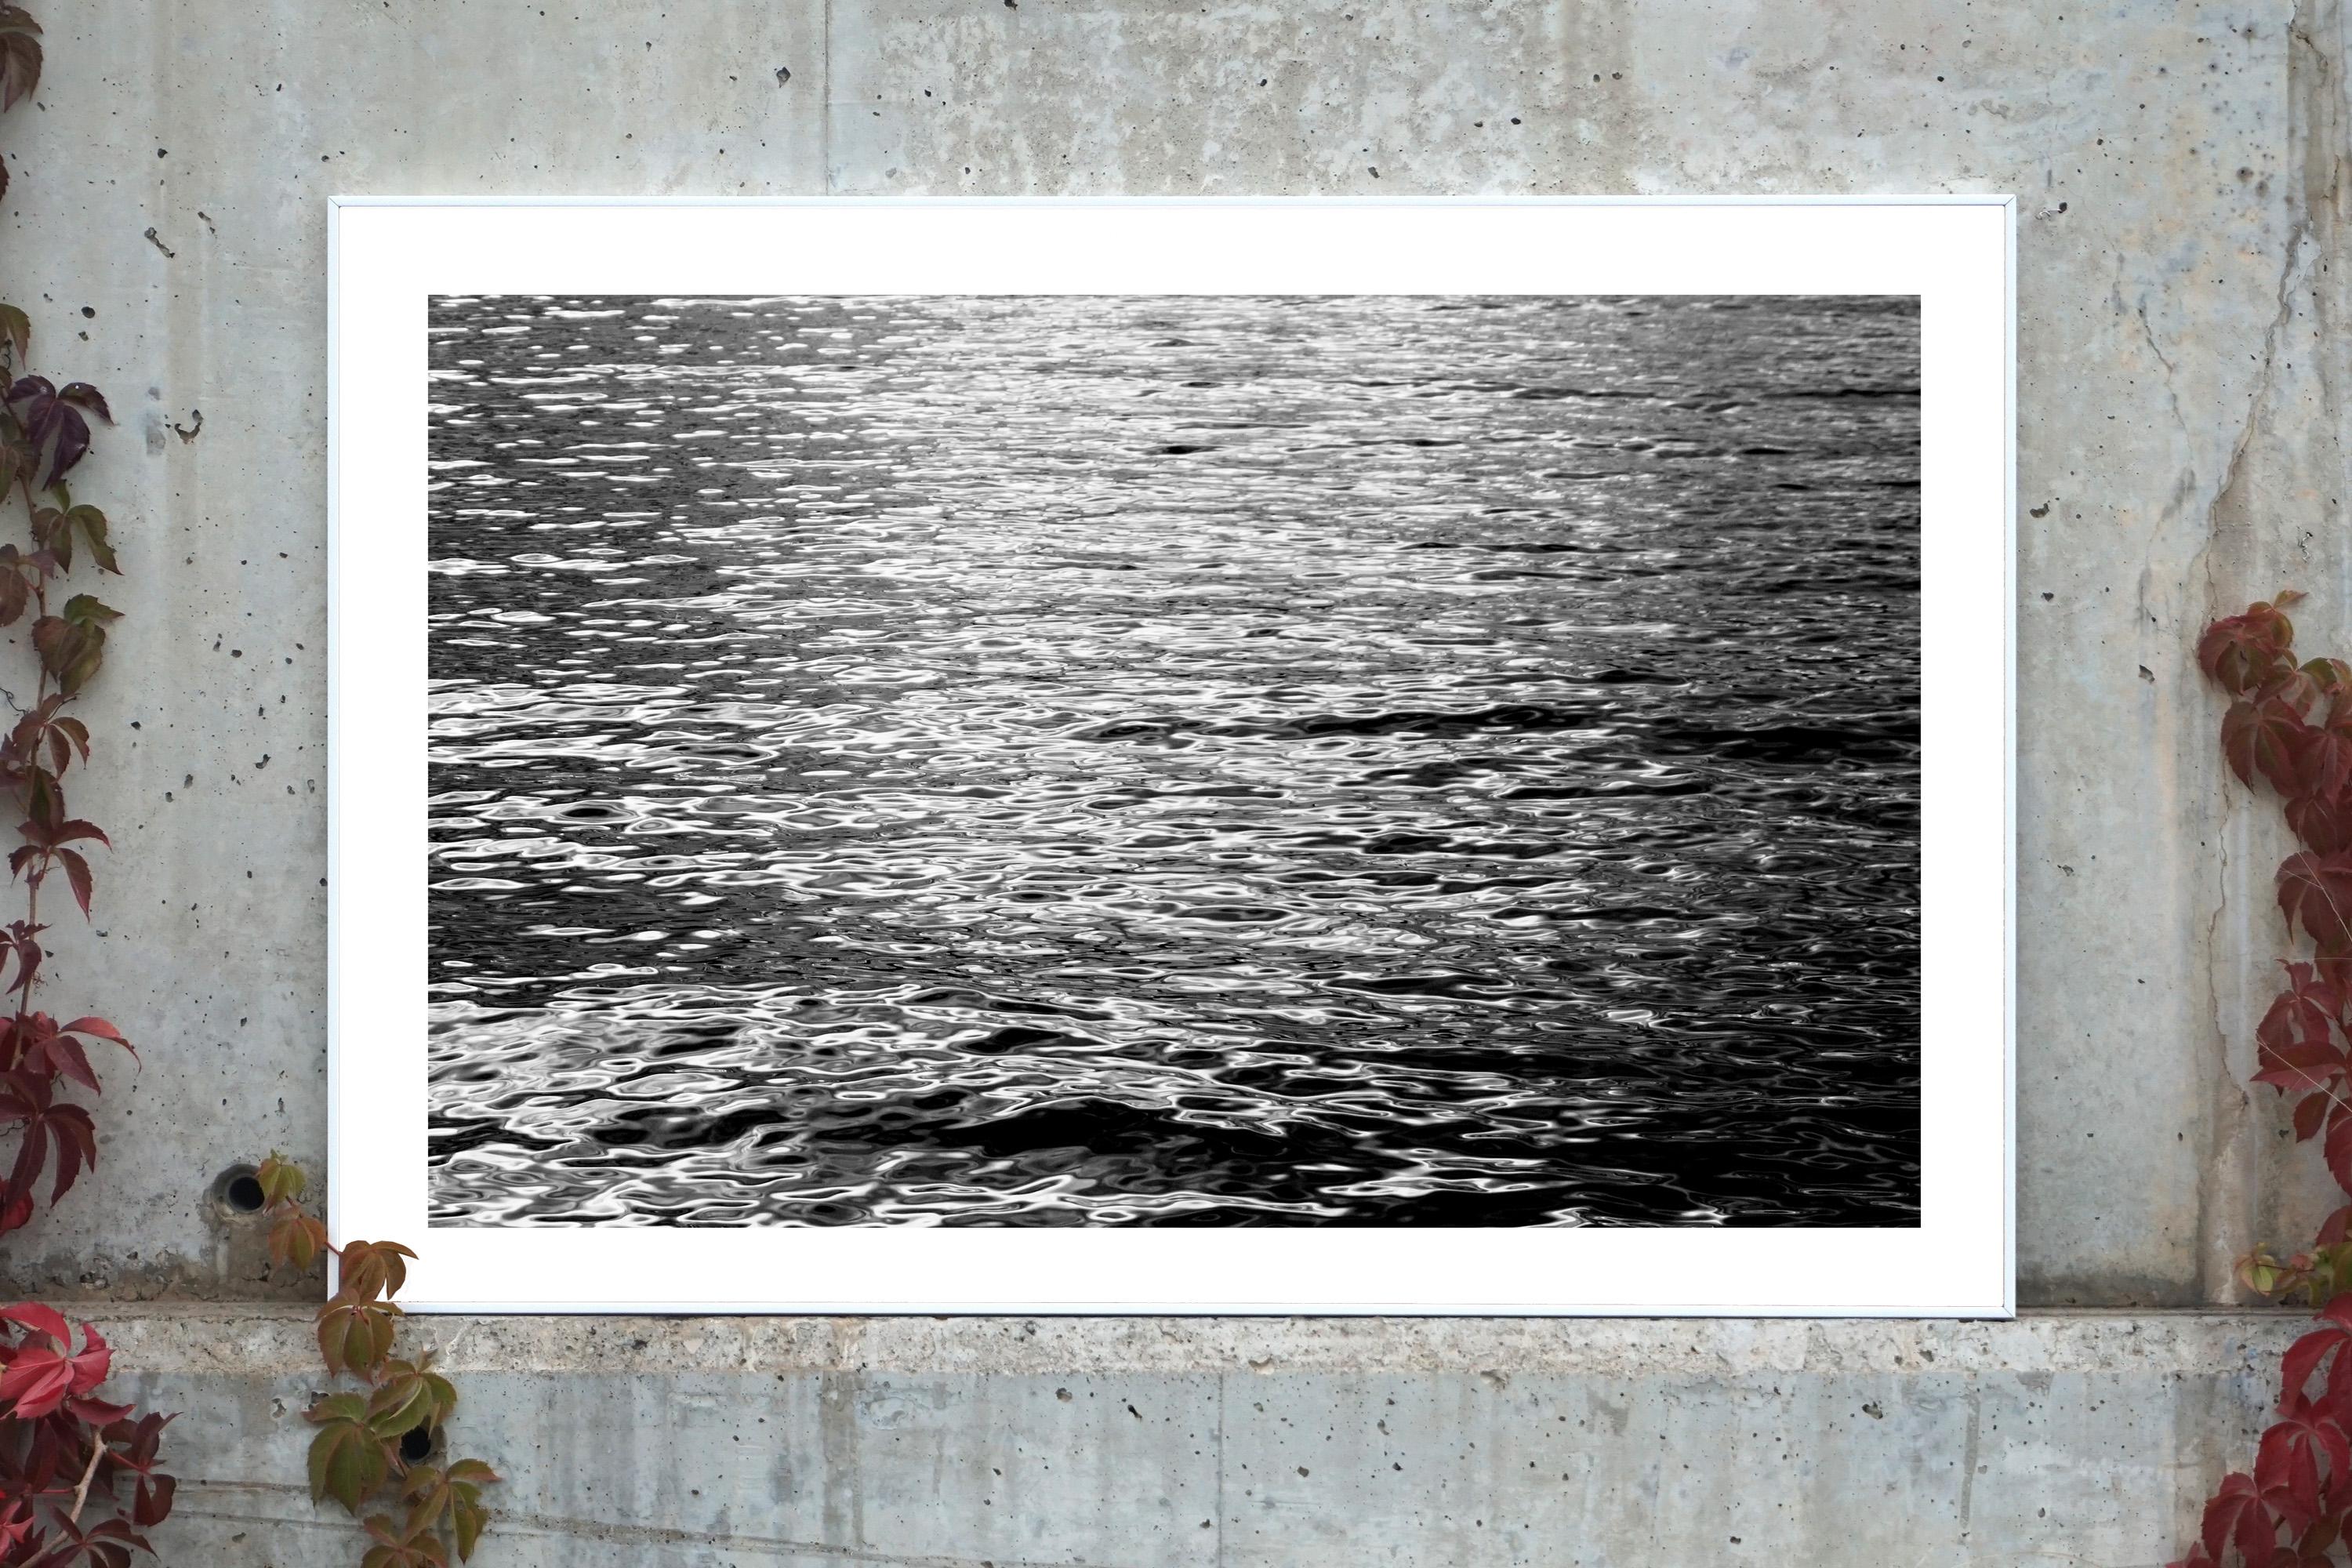 Black and White Abstract Ripples Under Moonlight, Nocturnal Nautical Giclée - Photograph by Kind of Cyan